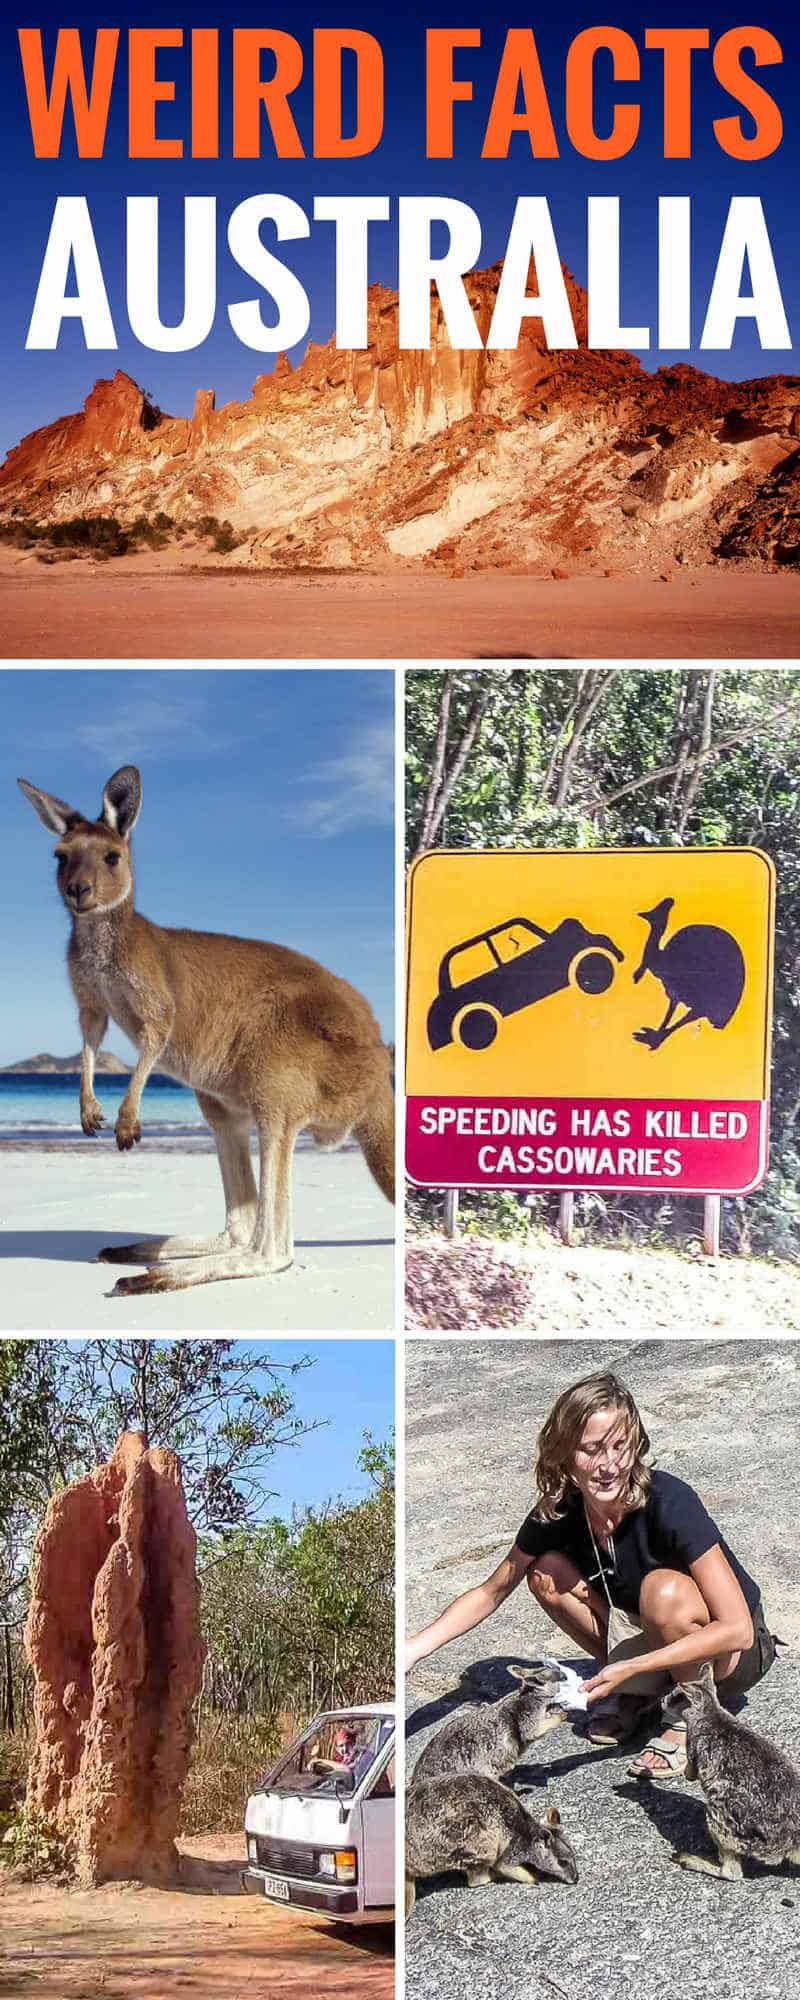 Weird Australia Facts. There's no getting around the fact that Australia is a weird, but wonderful place. From termite mounds as big as a building, to animals that defy description, we tell you all that's weird and cool about Australia. Australia Facts | Australia Facts for Kids | Cool Australia Facts | Fun Australia Facts | Australia Travel #Australia #australianproblems #aussie #Australiakids